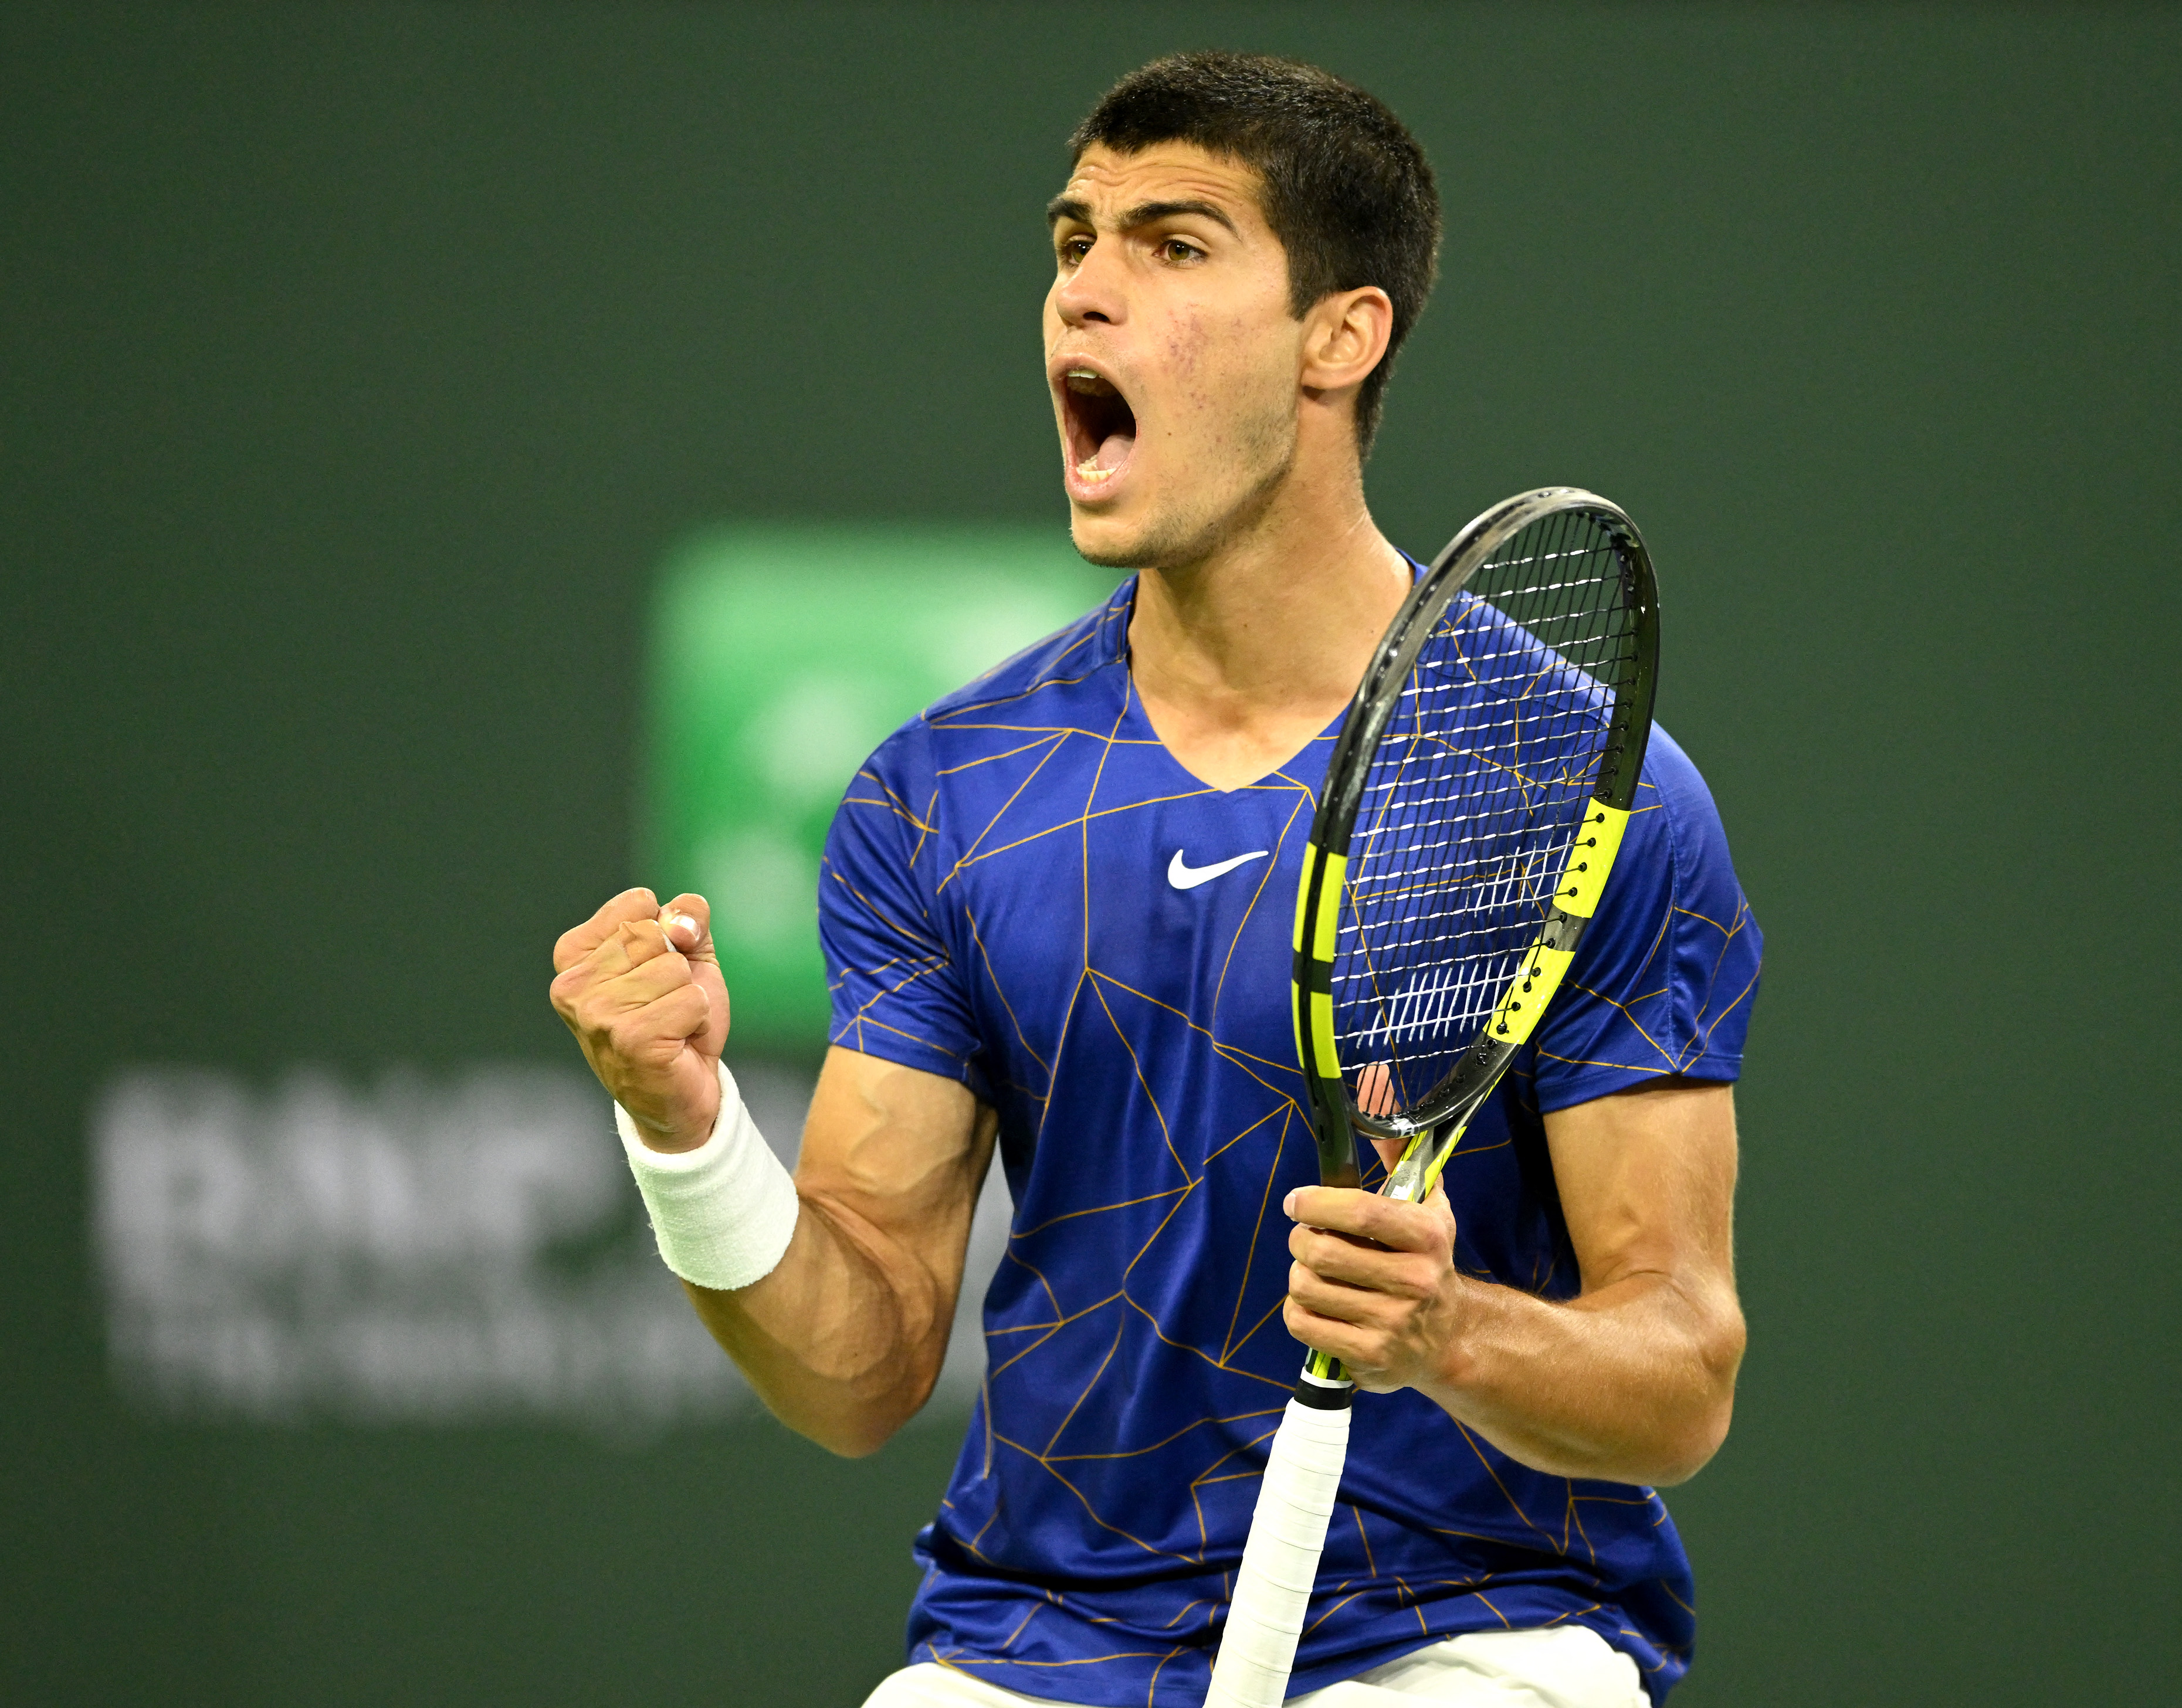 Mar 17, 2022; Indian Wells, CA, USA;  Carlos Alcaraz (ESP) celebrates in his quarterfinal match defeating Cameron Norrie (GBR) at the BNP Paribas Open at the Indian Wells Tennis Garden. Mandatory Credit: Jayne Kamin-Oncea-USA TODAY Sports